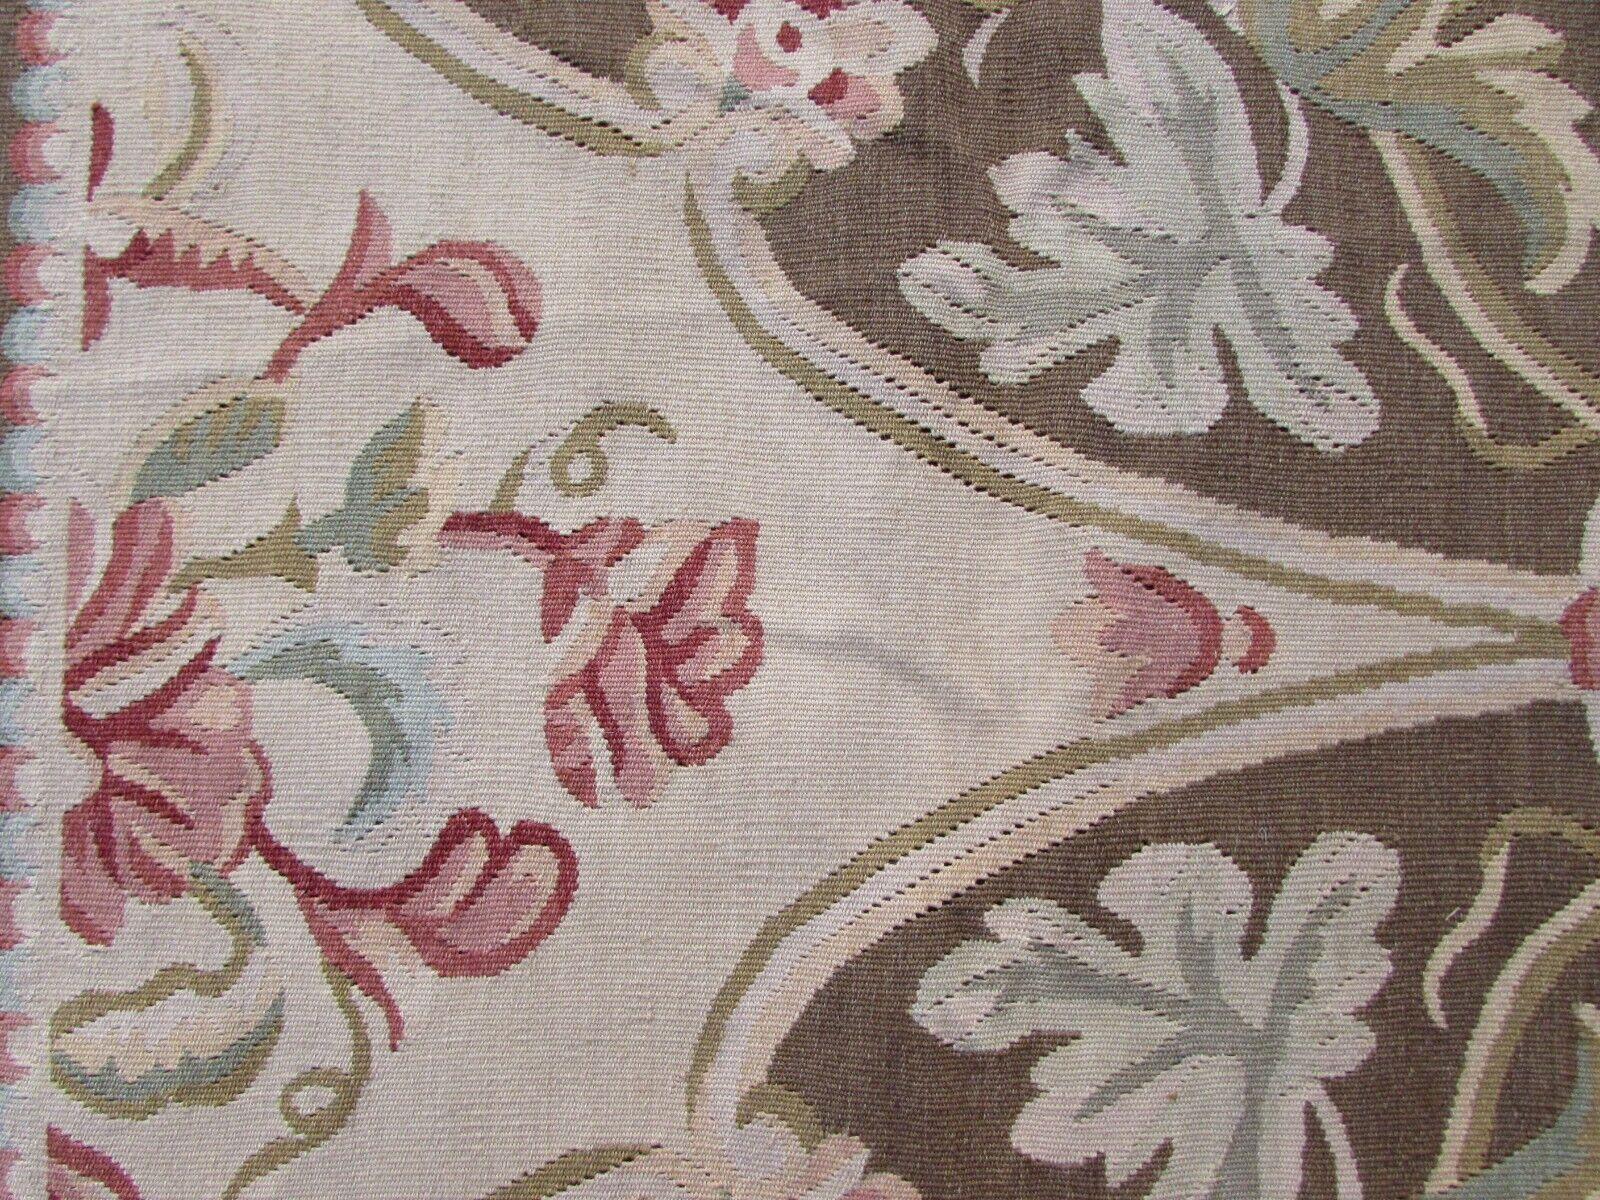 Handmade Vintage French Aubusson Flatweave Rug 9.9' x 14.2', 1970s, 1Q42 For Sale 2